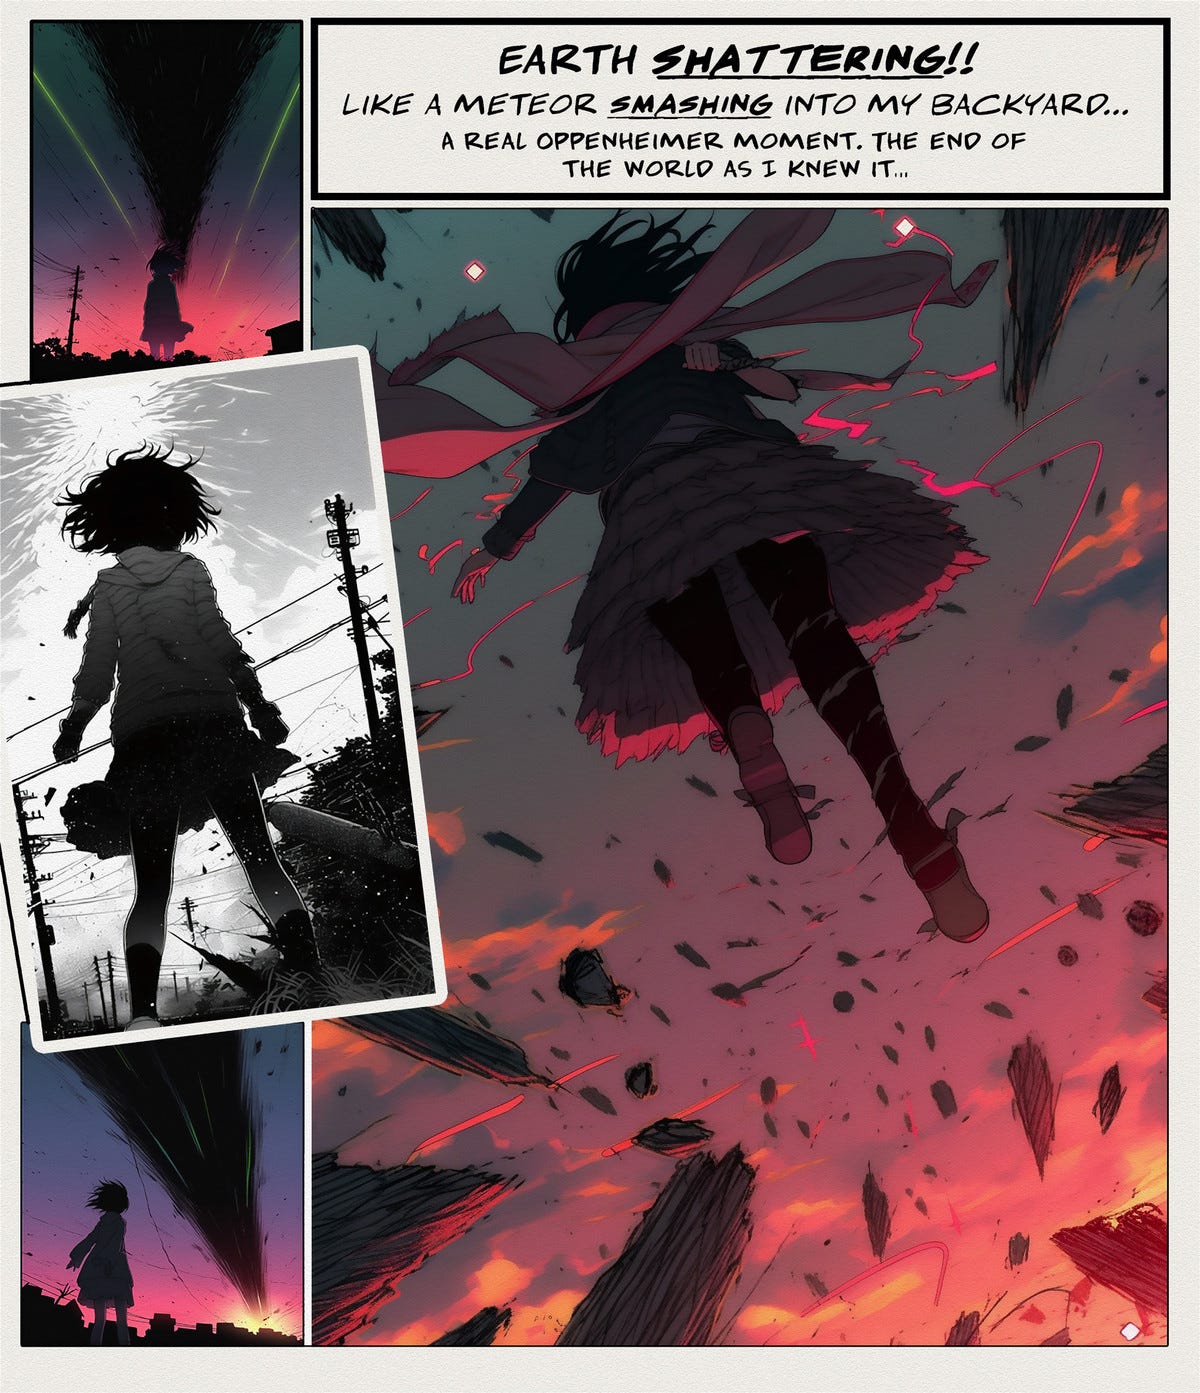 "Like a Meteor Smashing into My Backyard," original manga illustration by the author. 4 panels show a young woman observing a falling meteor and finally exploding her into space. Pinks, neon blues, and purples.